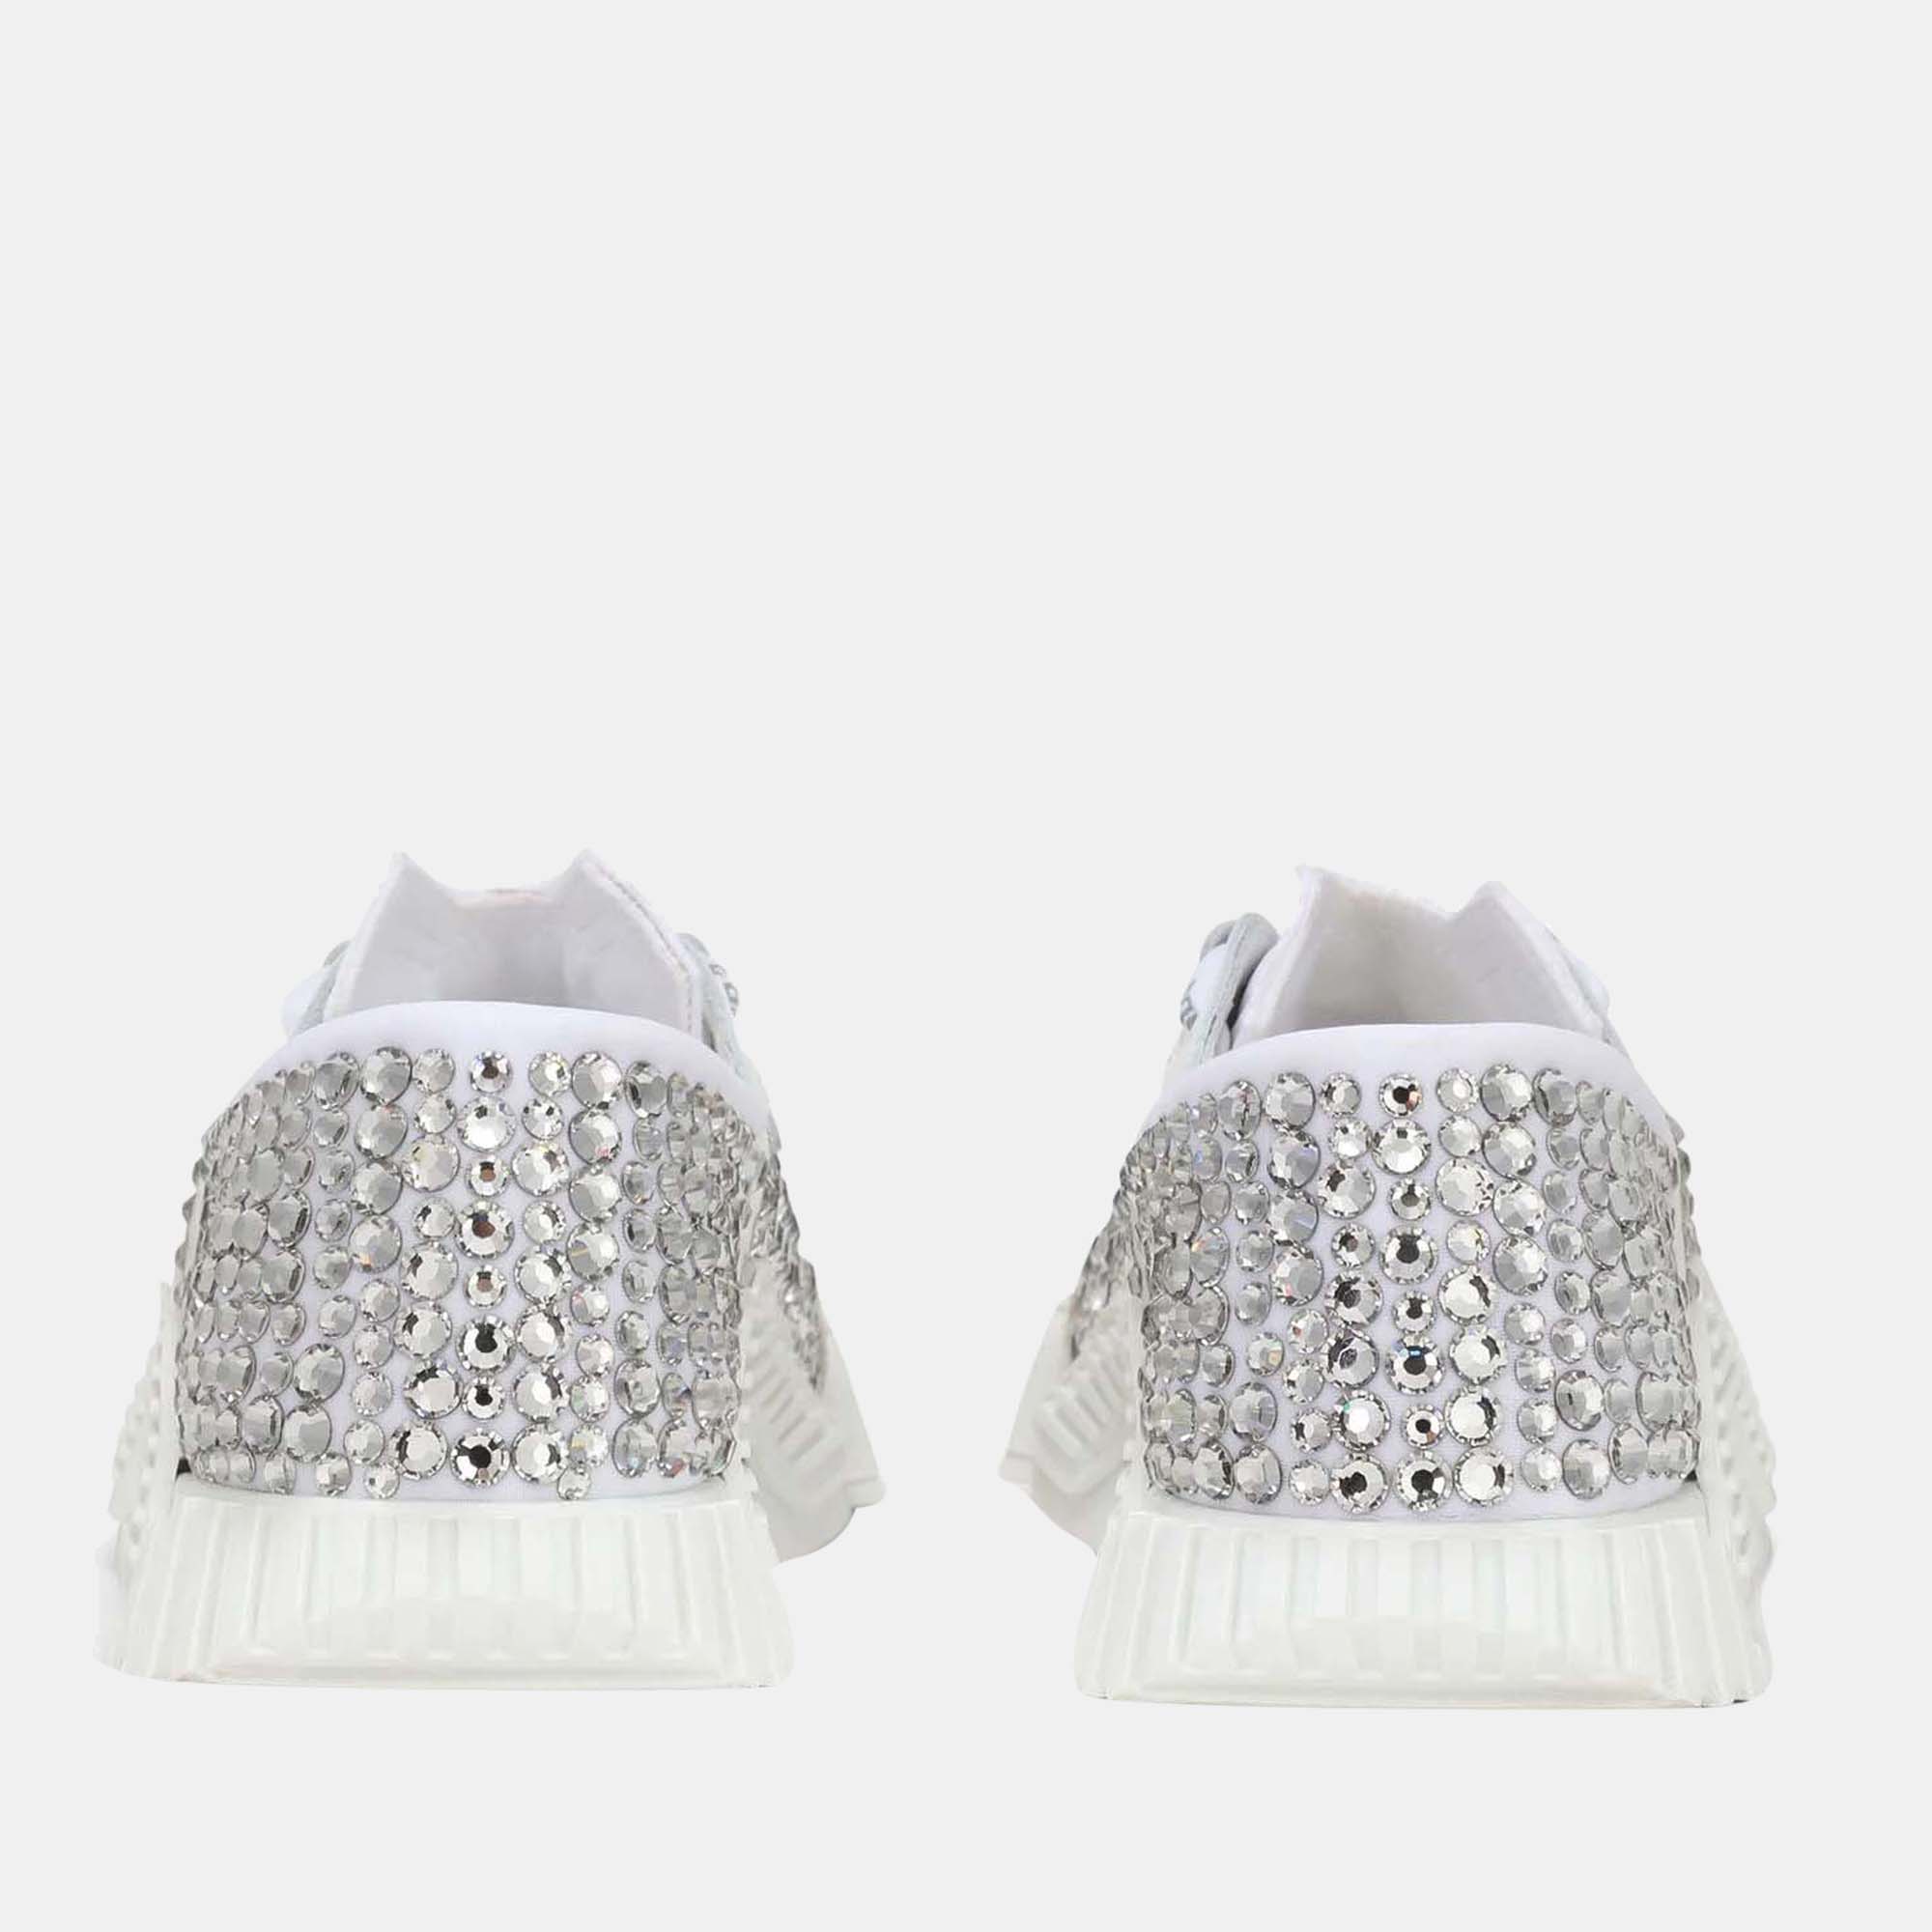 Dolce & Gabbana Kids White - Leather - NS1 Crystal-Embellished Sneakers EU 29